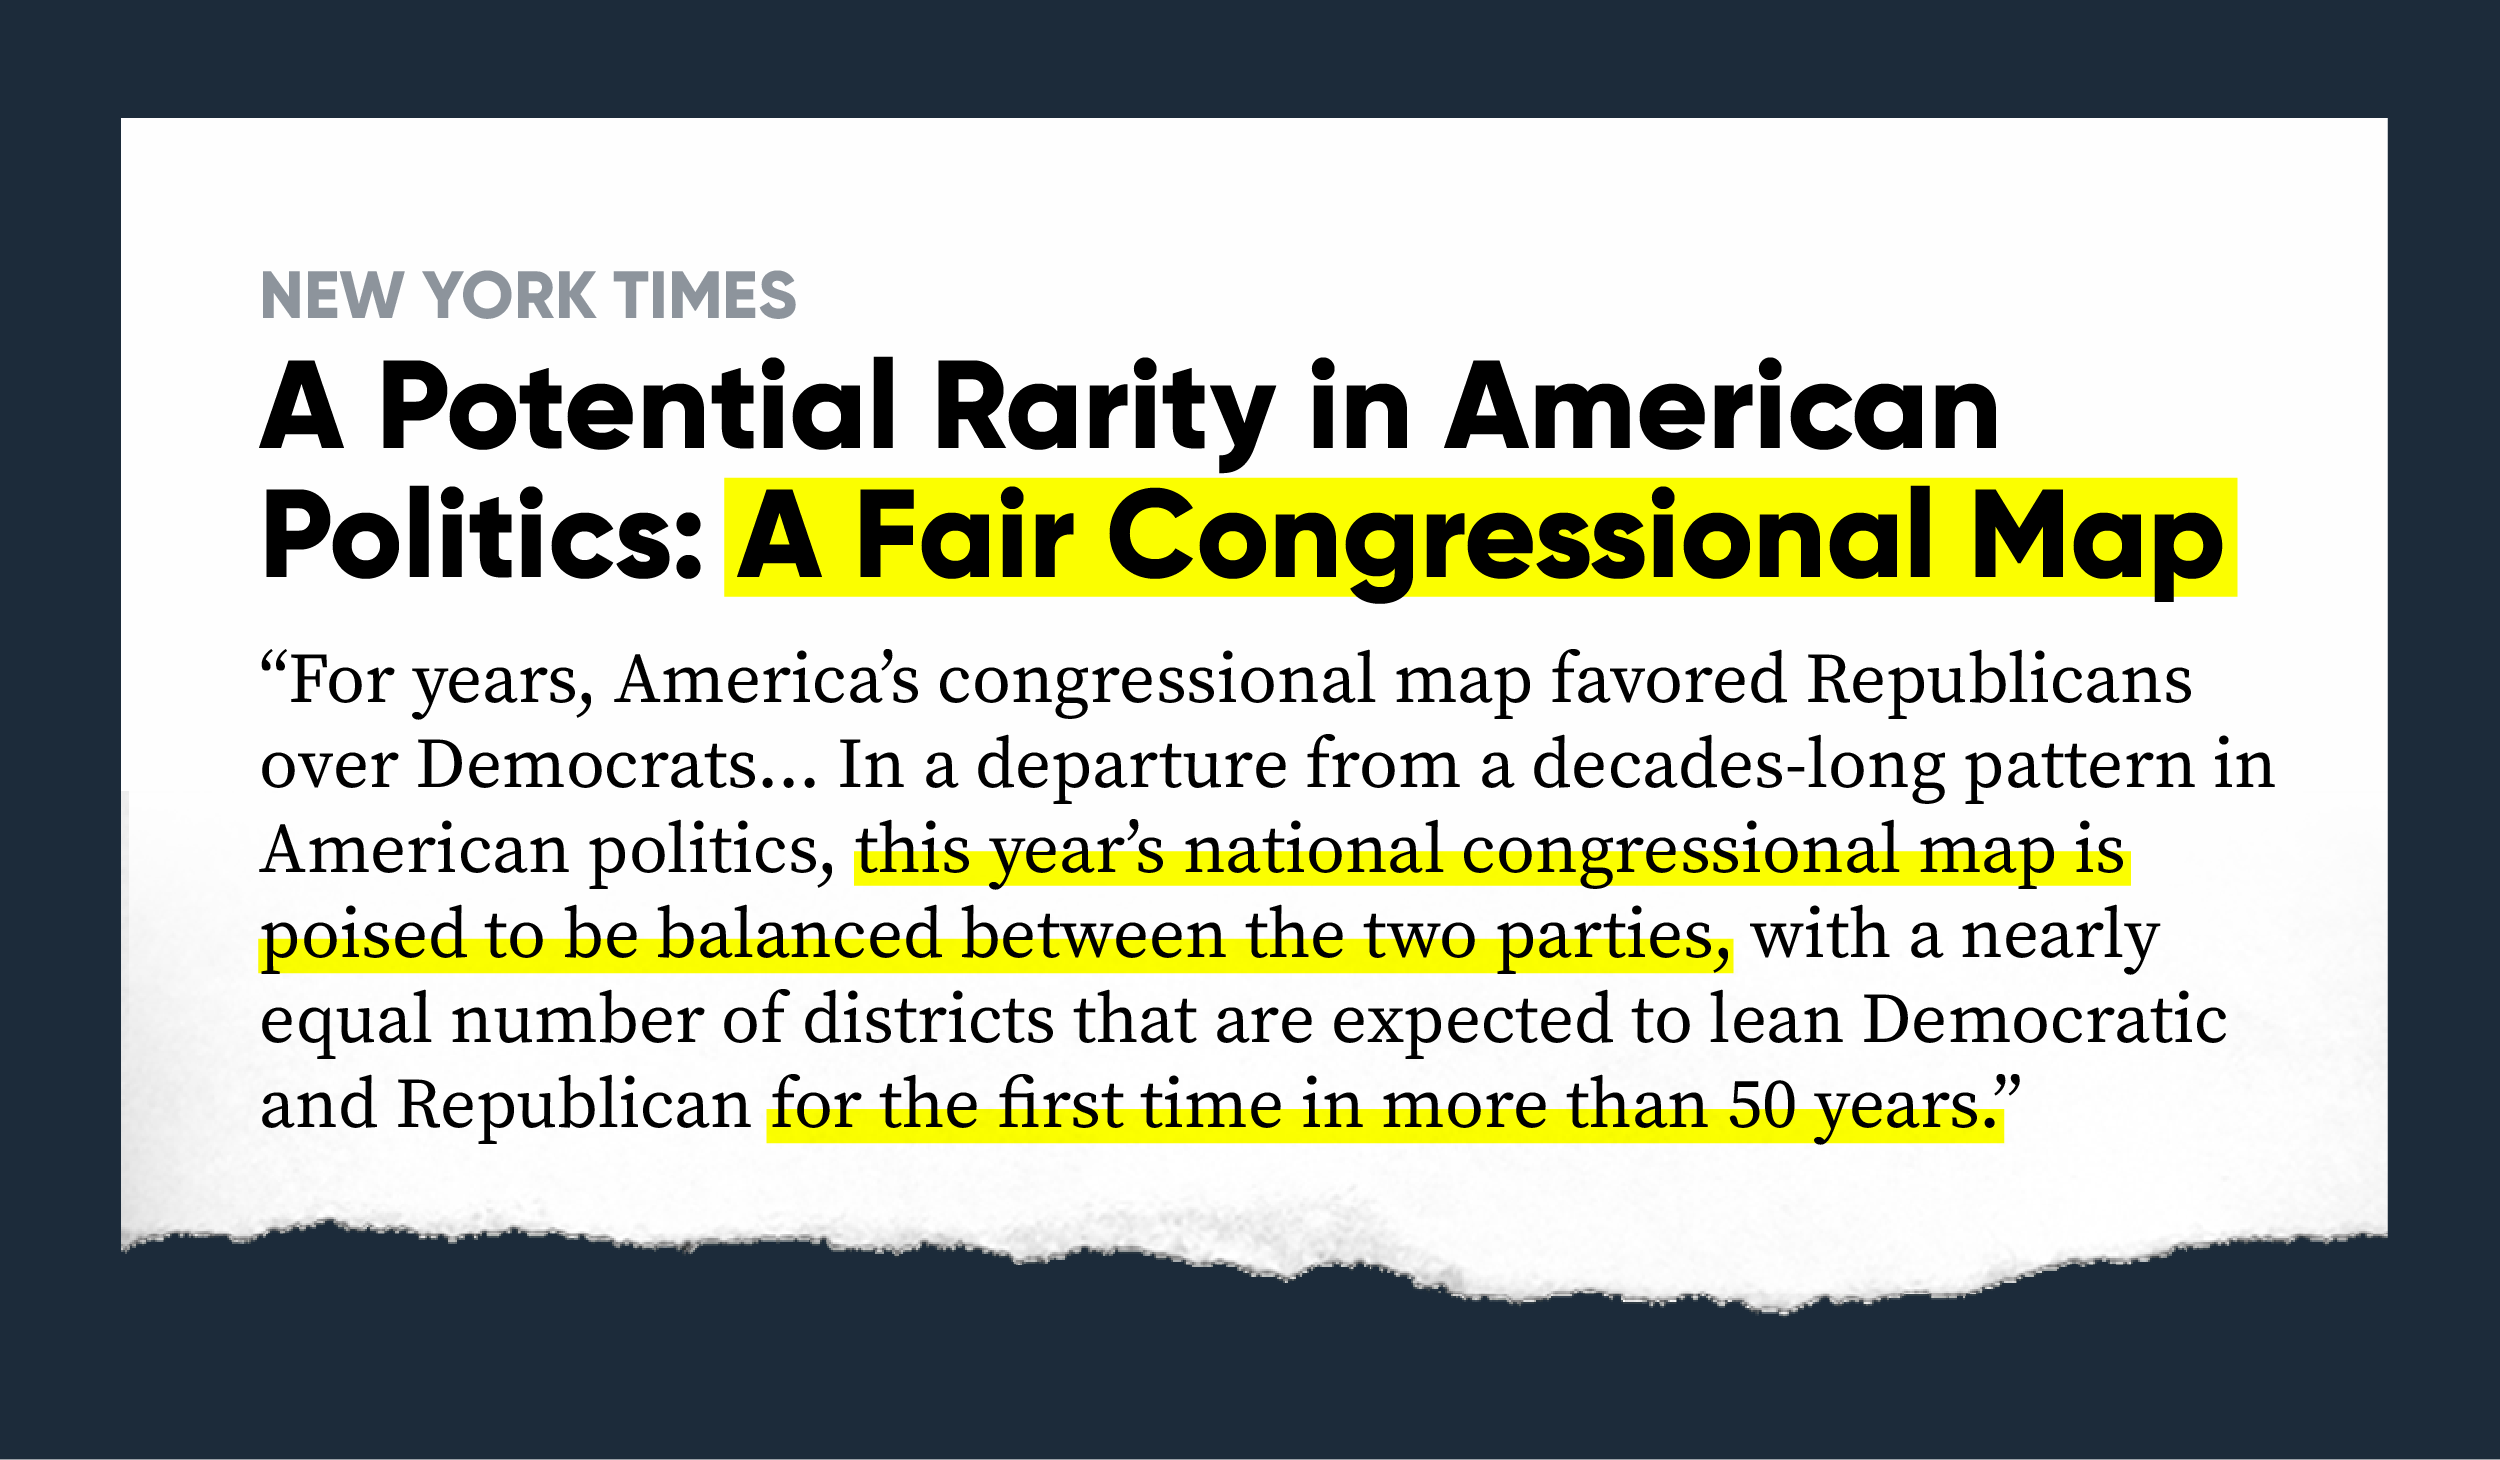 NYT: A Potential Rarity in American Politics: A Fair Congressional Map "For years, America’s congressional map favored Republicans over Democrats. But that may not remain the case for long. In a departure from a decades-long pattern in American politics, this year’s national congressional map is poised to be balanced between the two parties, with a nearly equal number of districts that are expected to lean Democratic and Republican for the first time in more than 50 years."